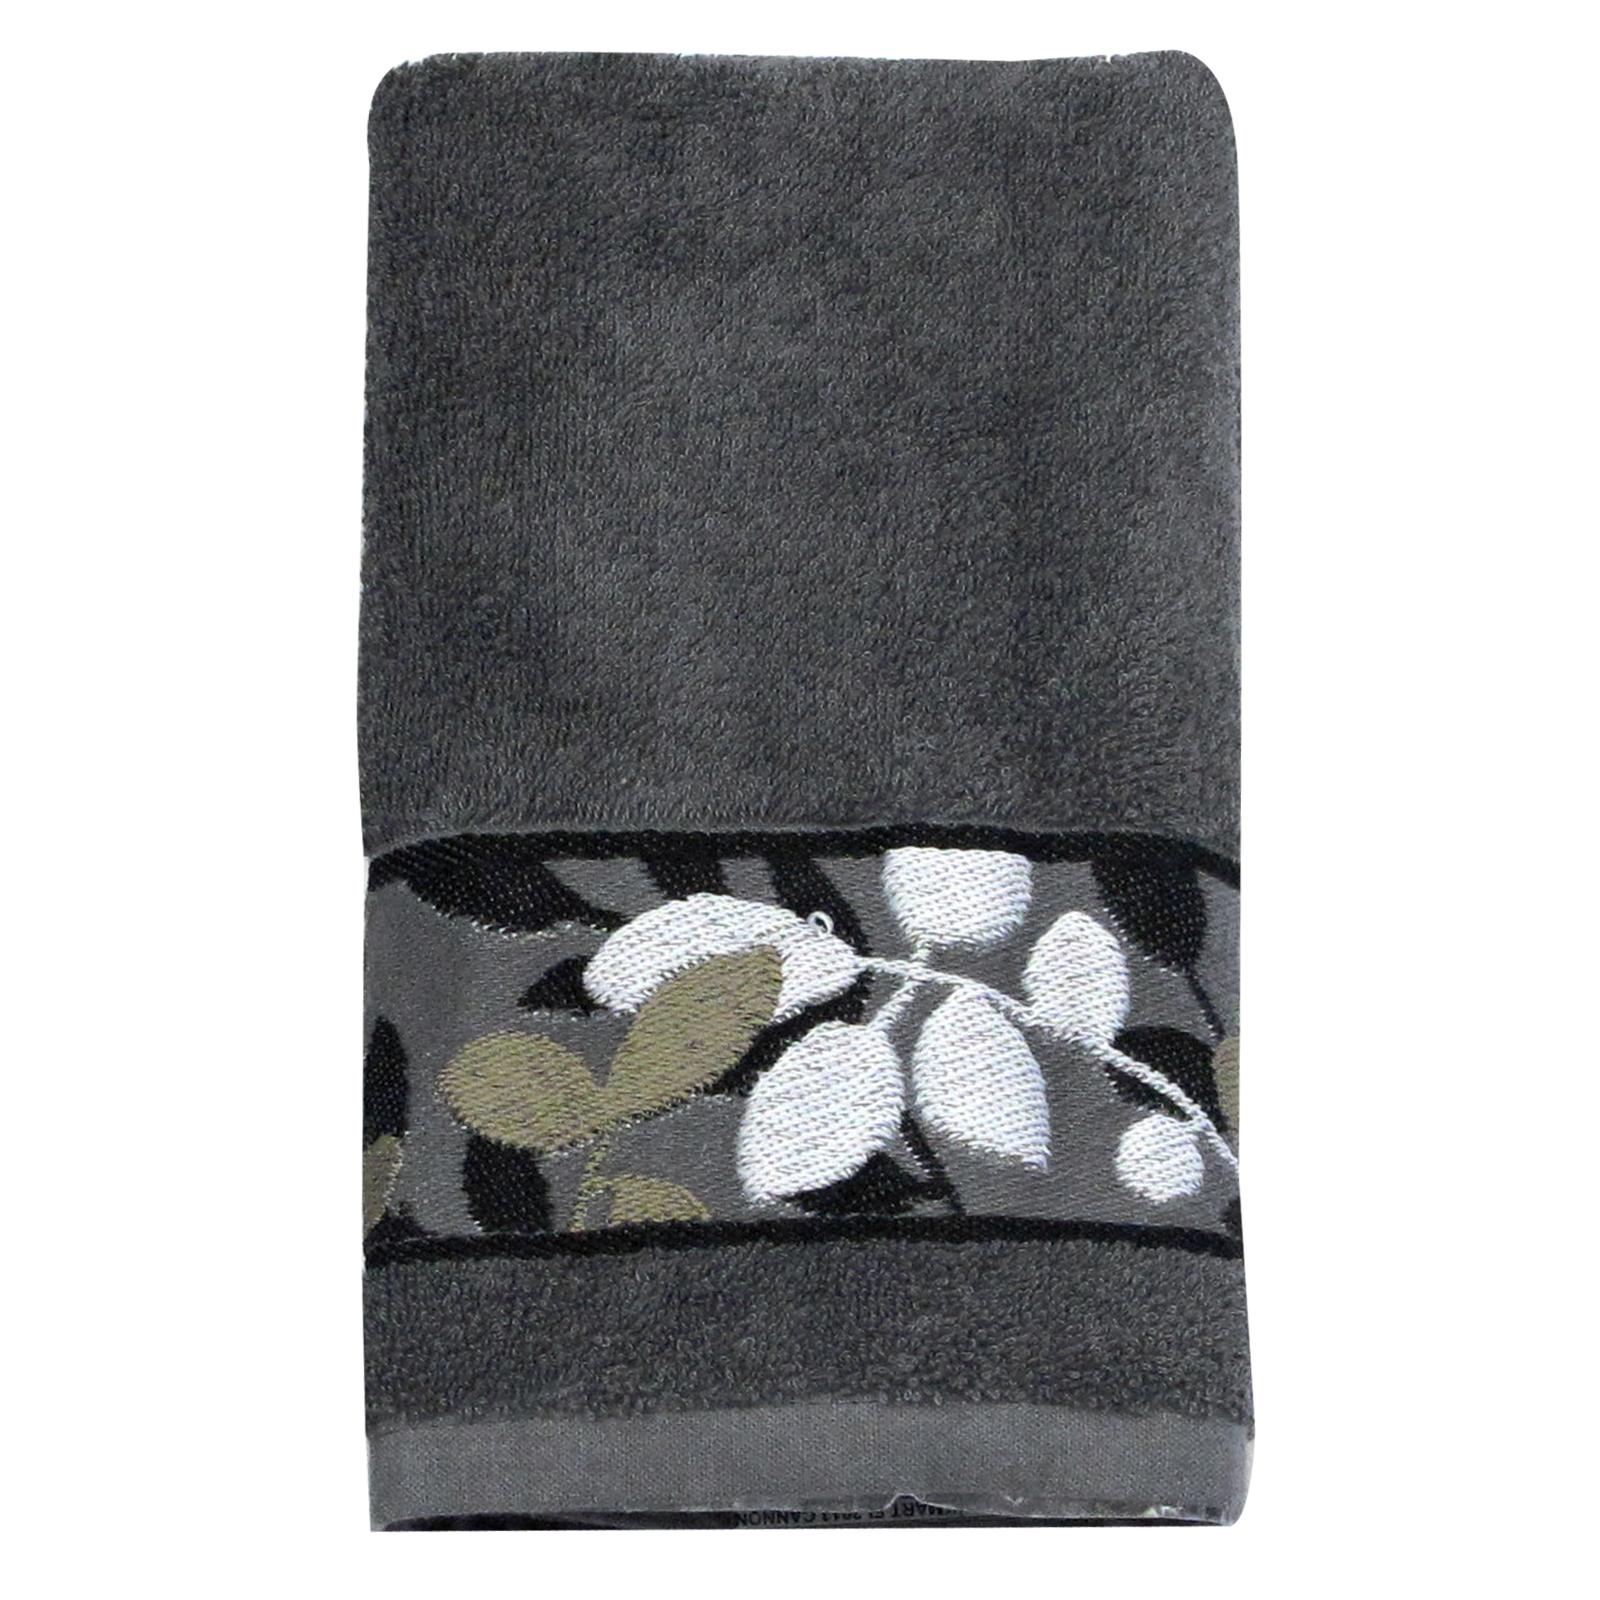 Cannon Hand Towel - Leafing